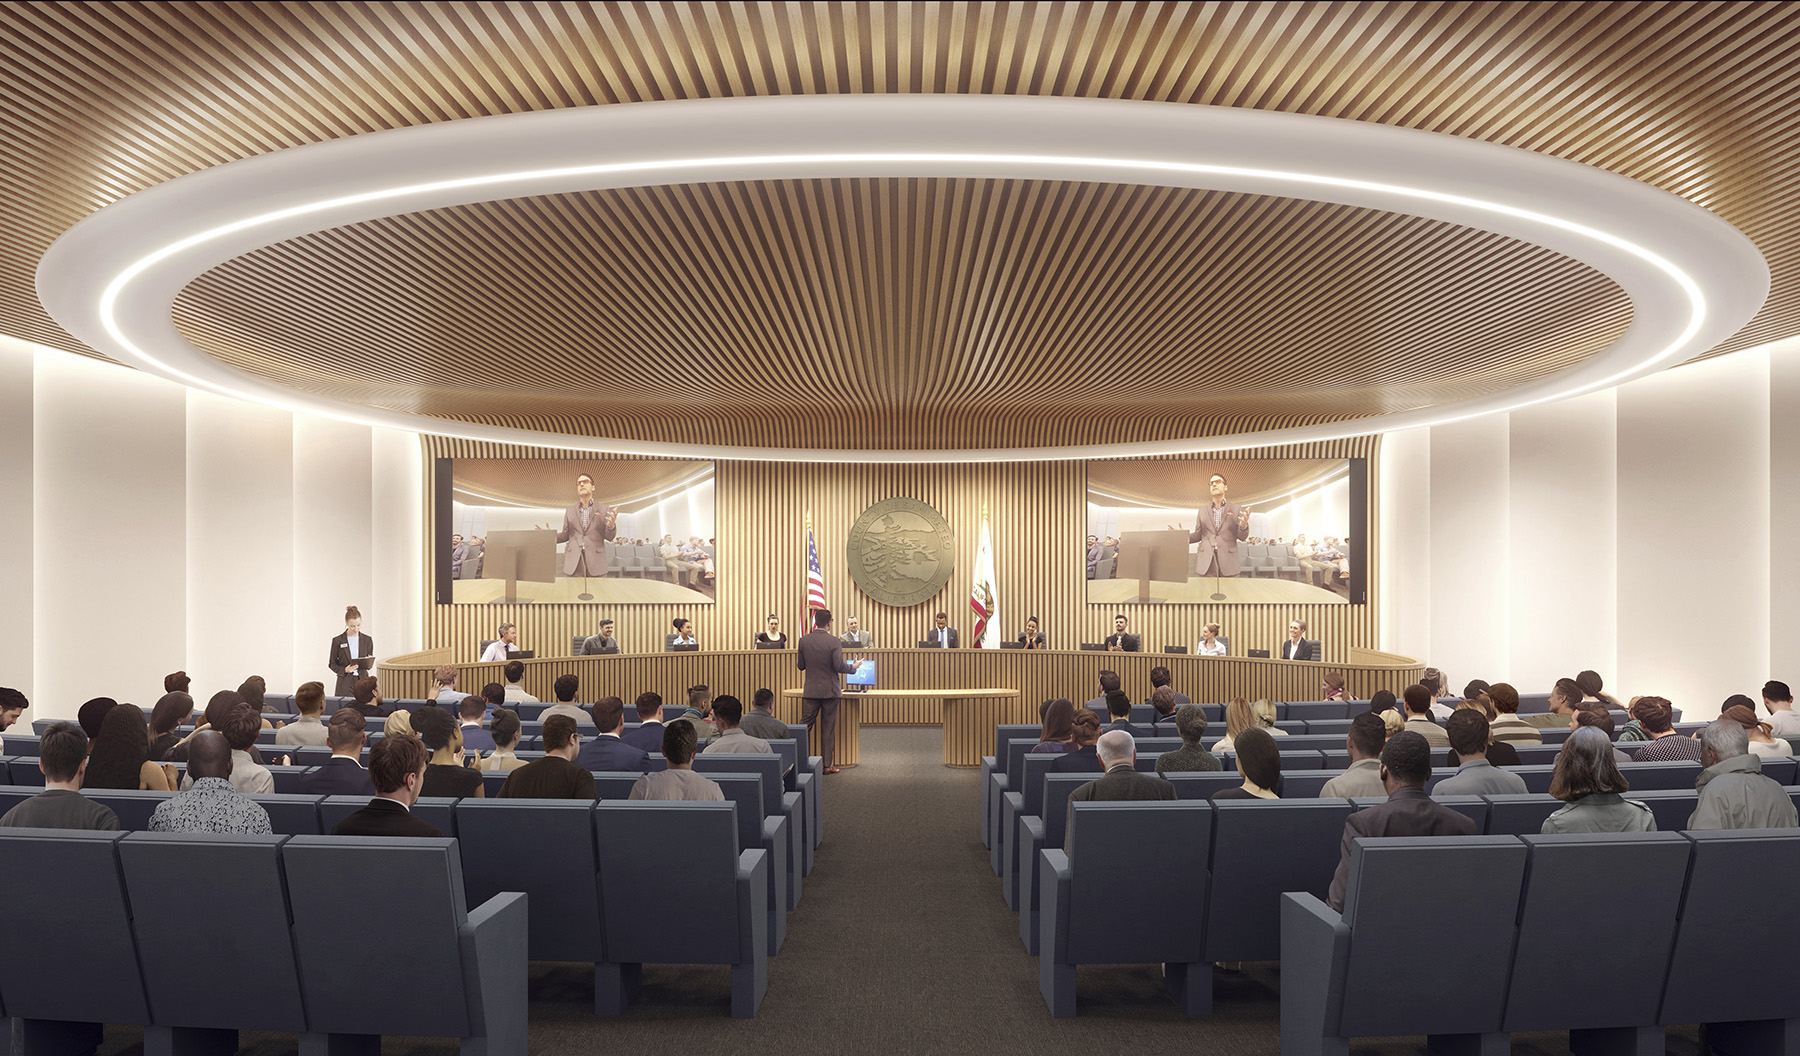 COB3’s ground floor will feature the large chamber in which the county’s board of supervisors will hold public meetings. (Rendering courtesy SOM)